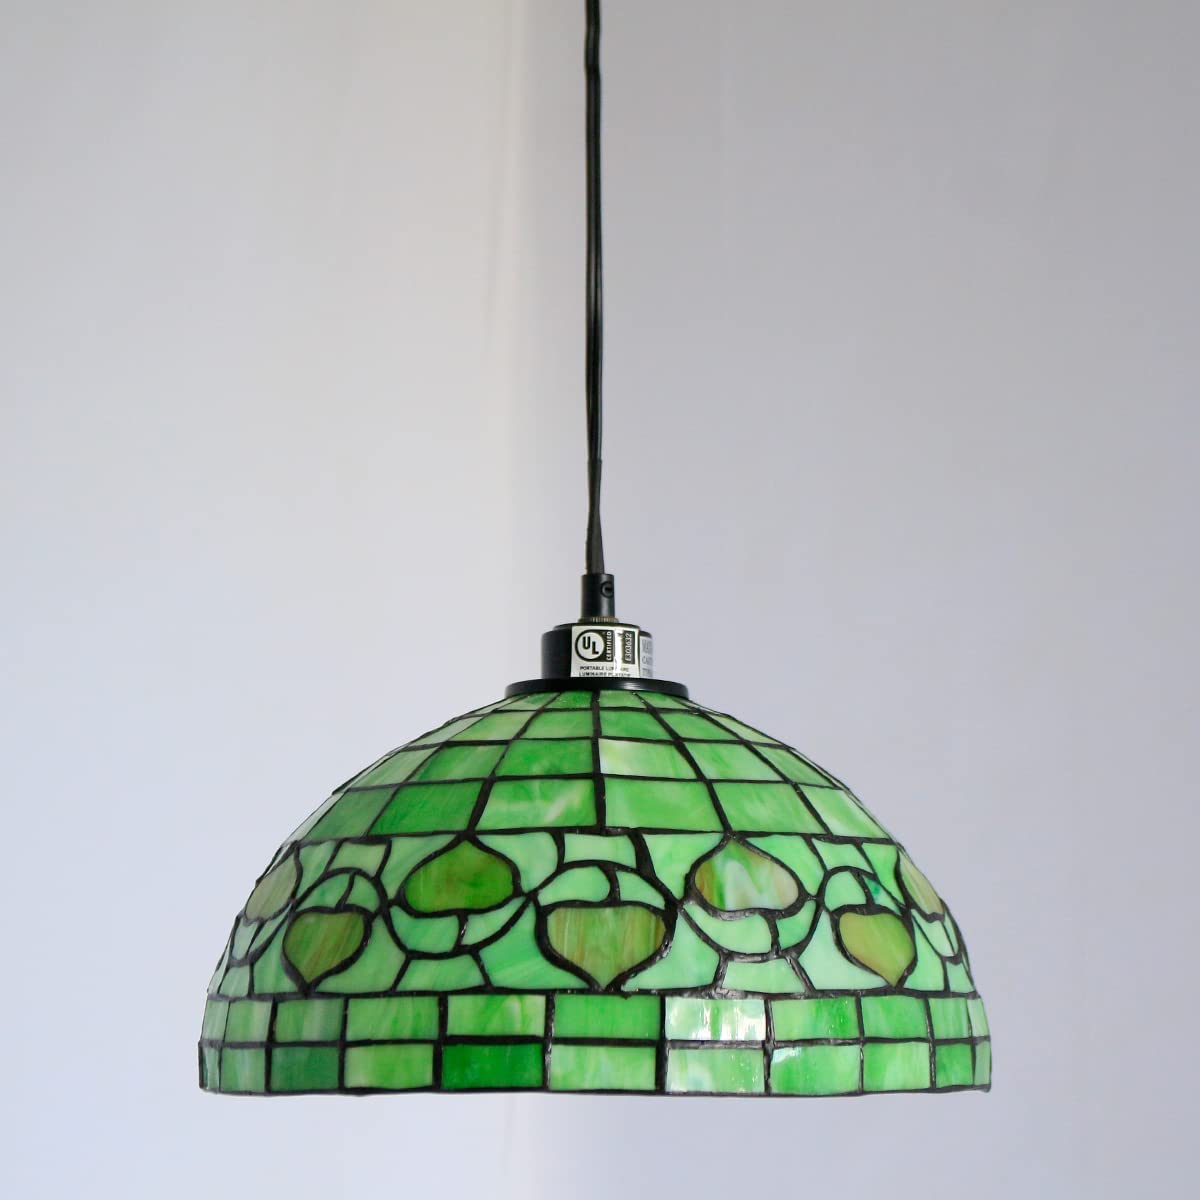 Werfactory® Tiffany Pendant Light Fixture 12 Inch Handmade Green Stained Glass Shade Hanging Lamp